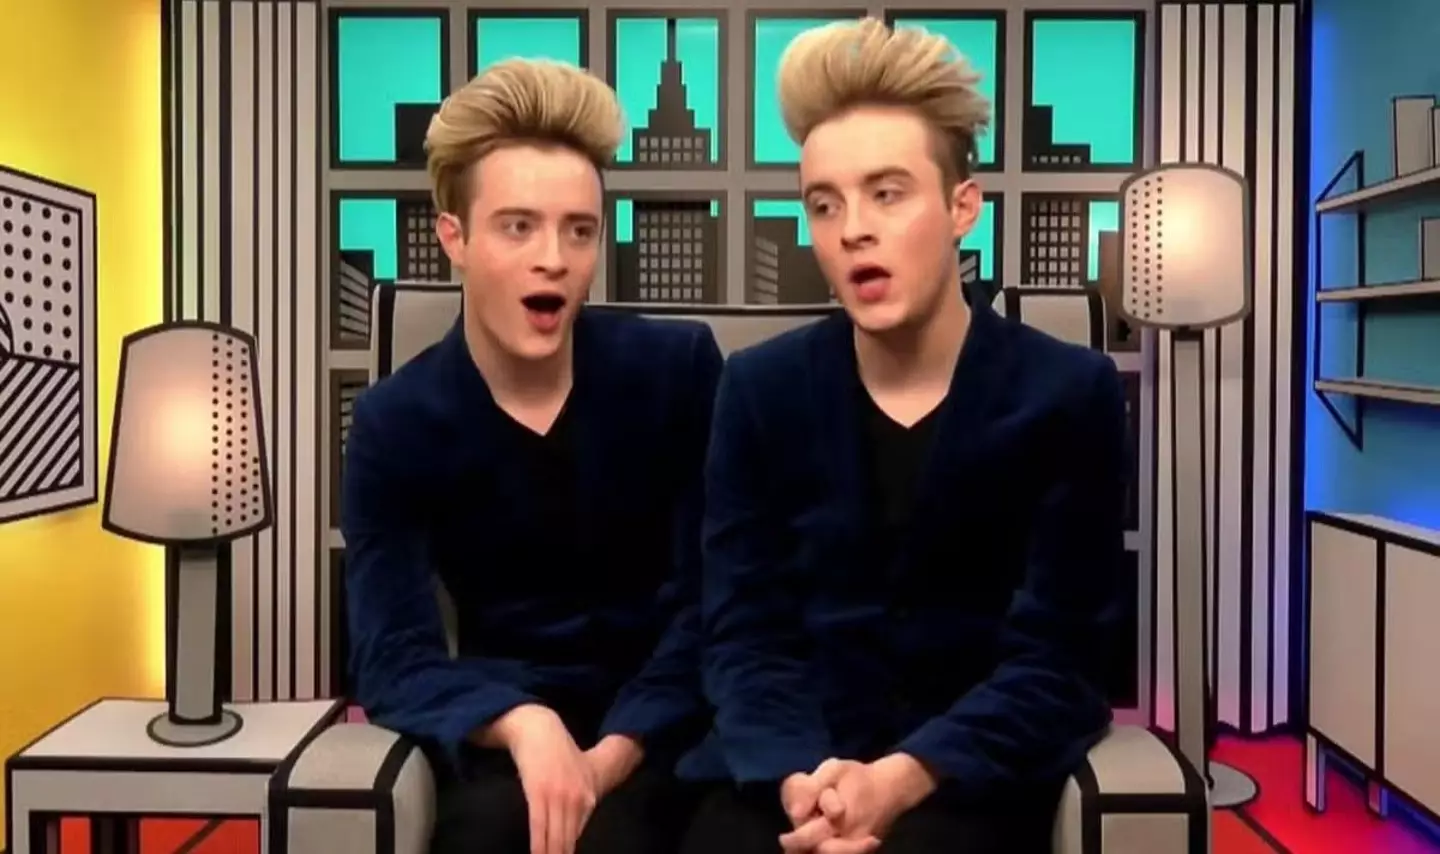 Jedward received £500k for their first stint on Celebrity Big Brother.